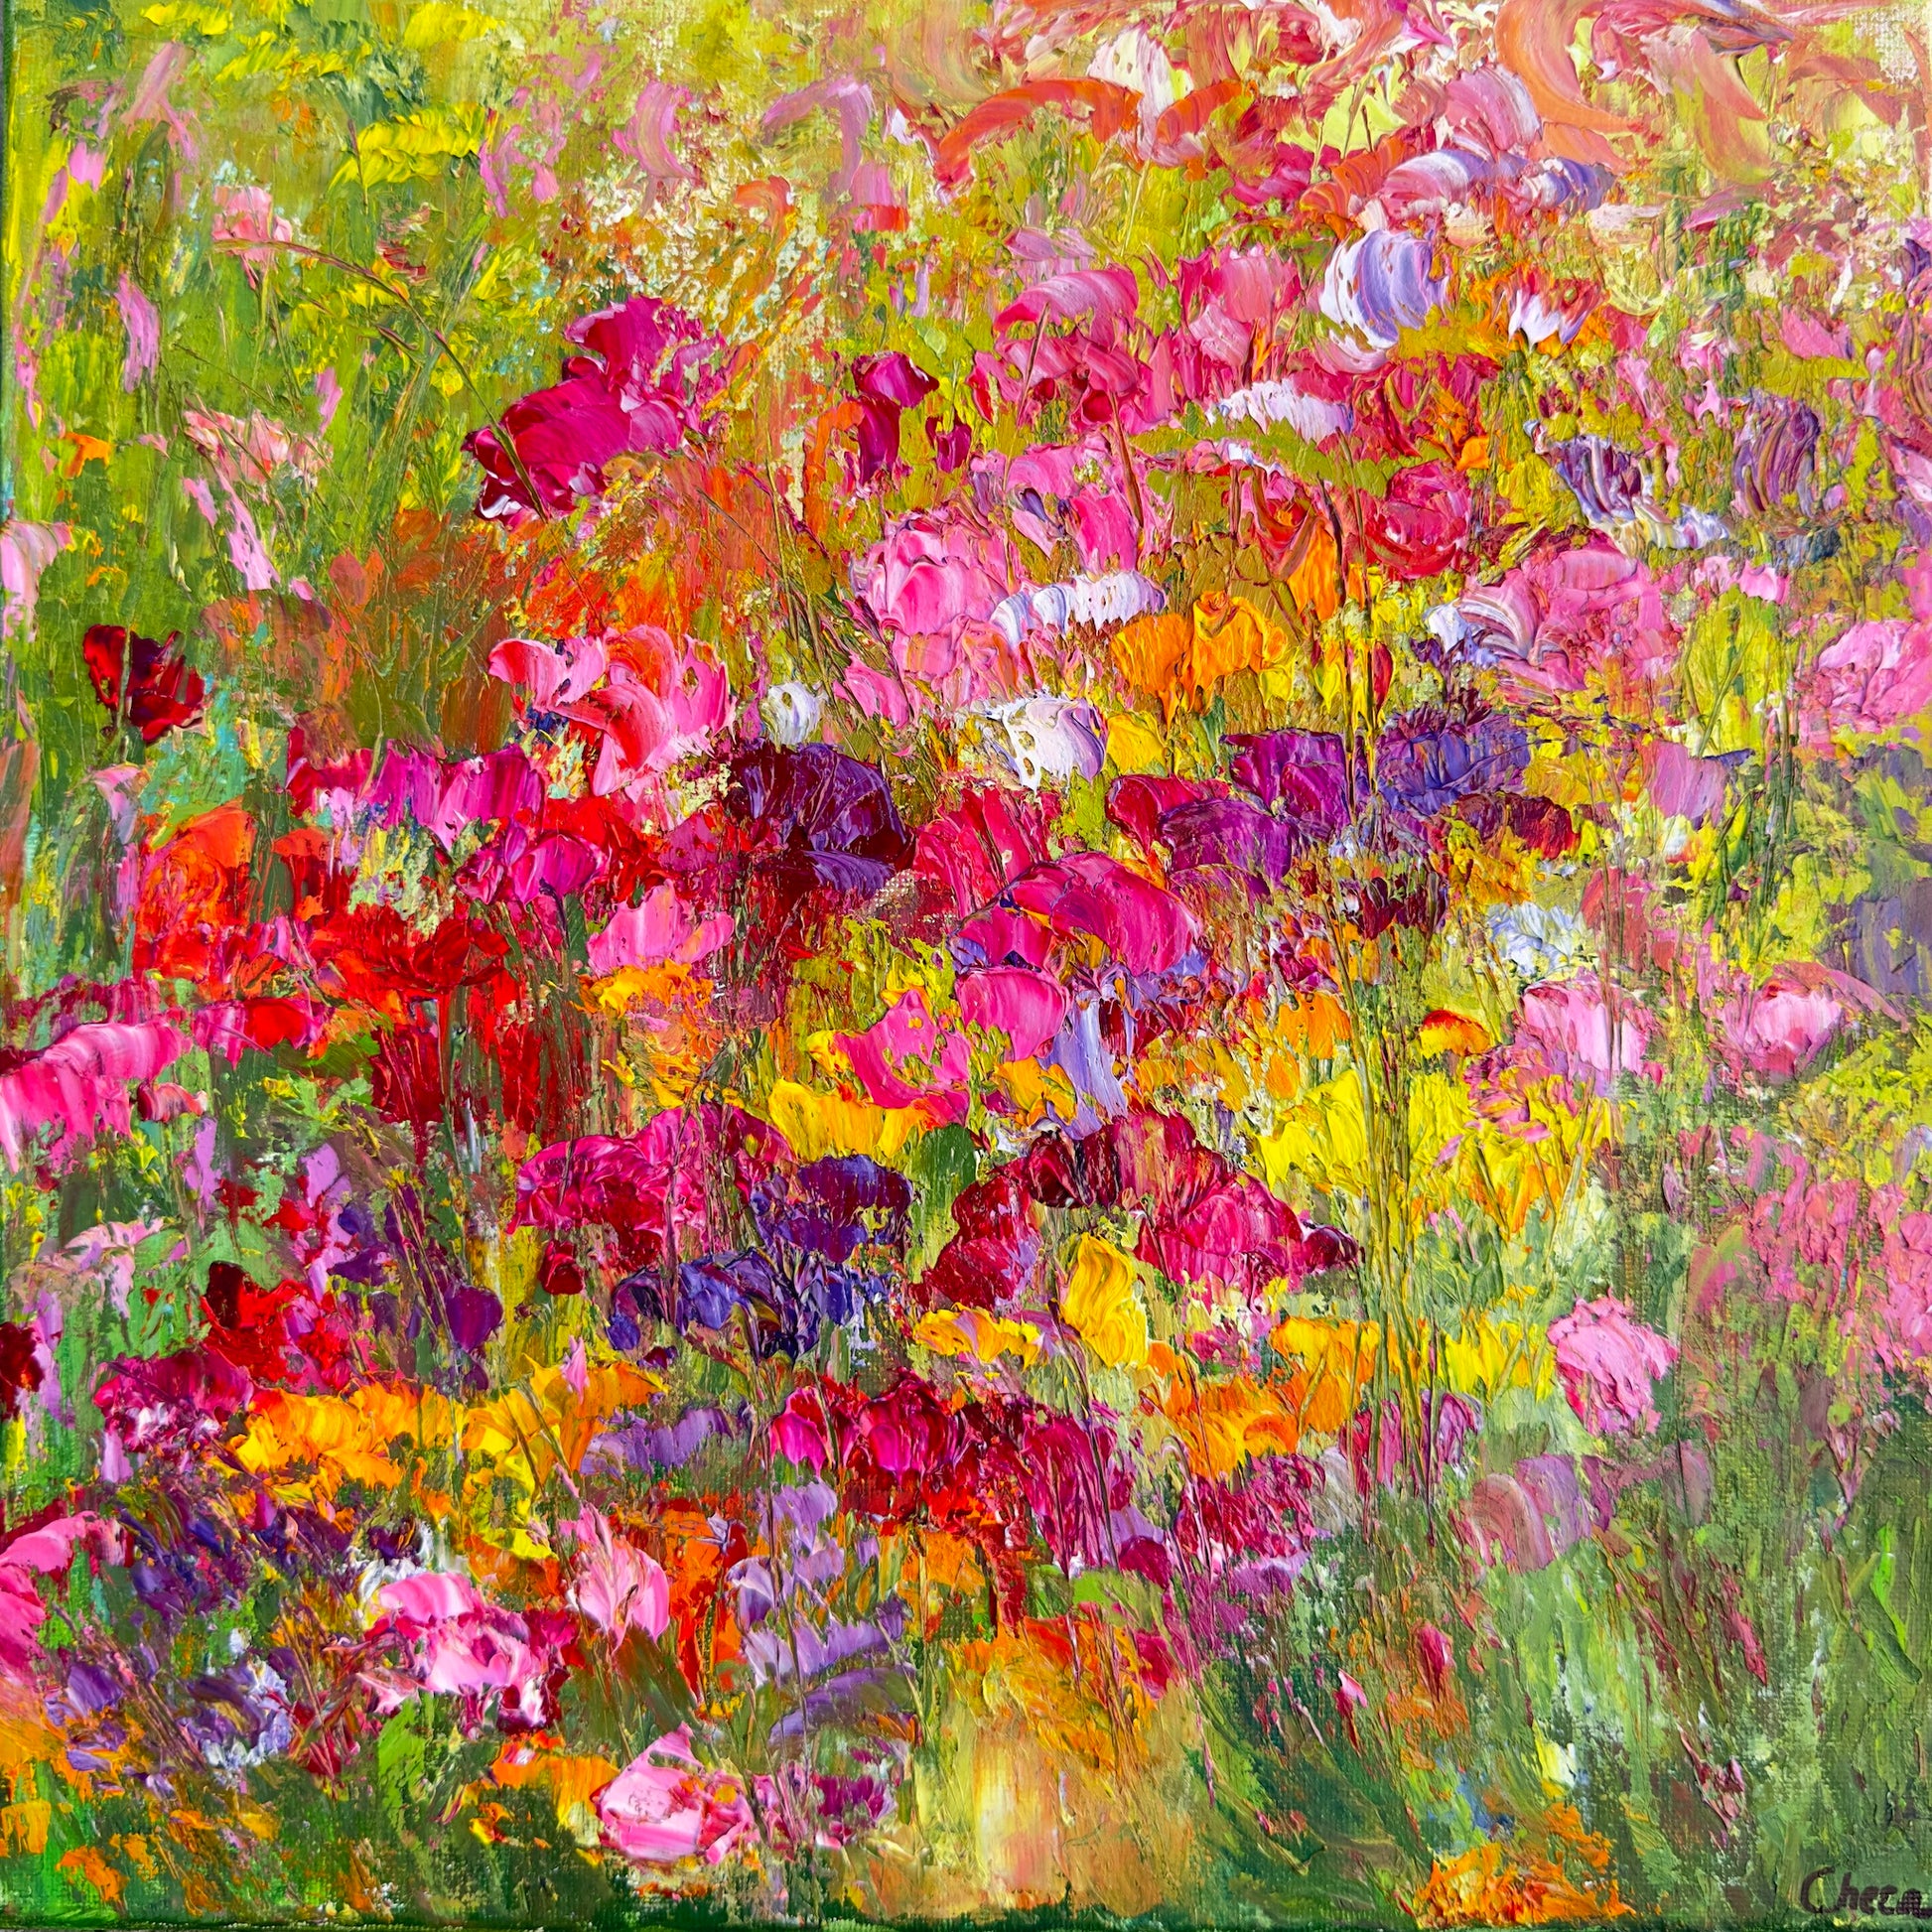 abstract impressionist oil painting of a close up of wild flowers in pinks and yellows measuring 12" x 12"